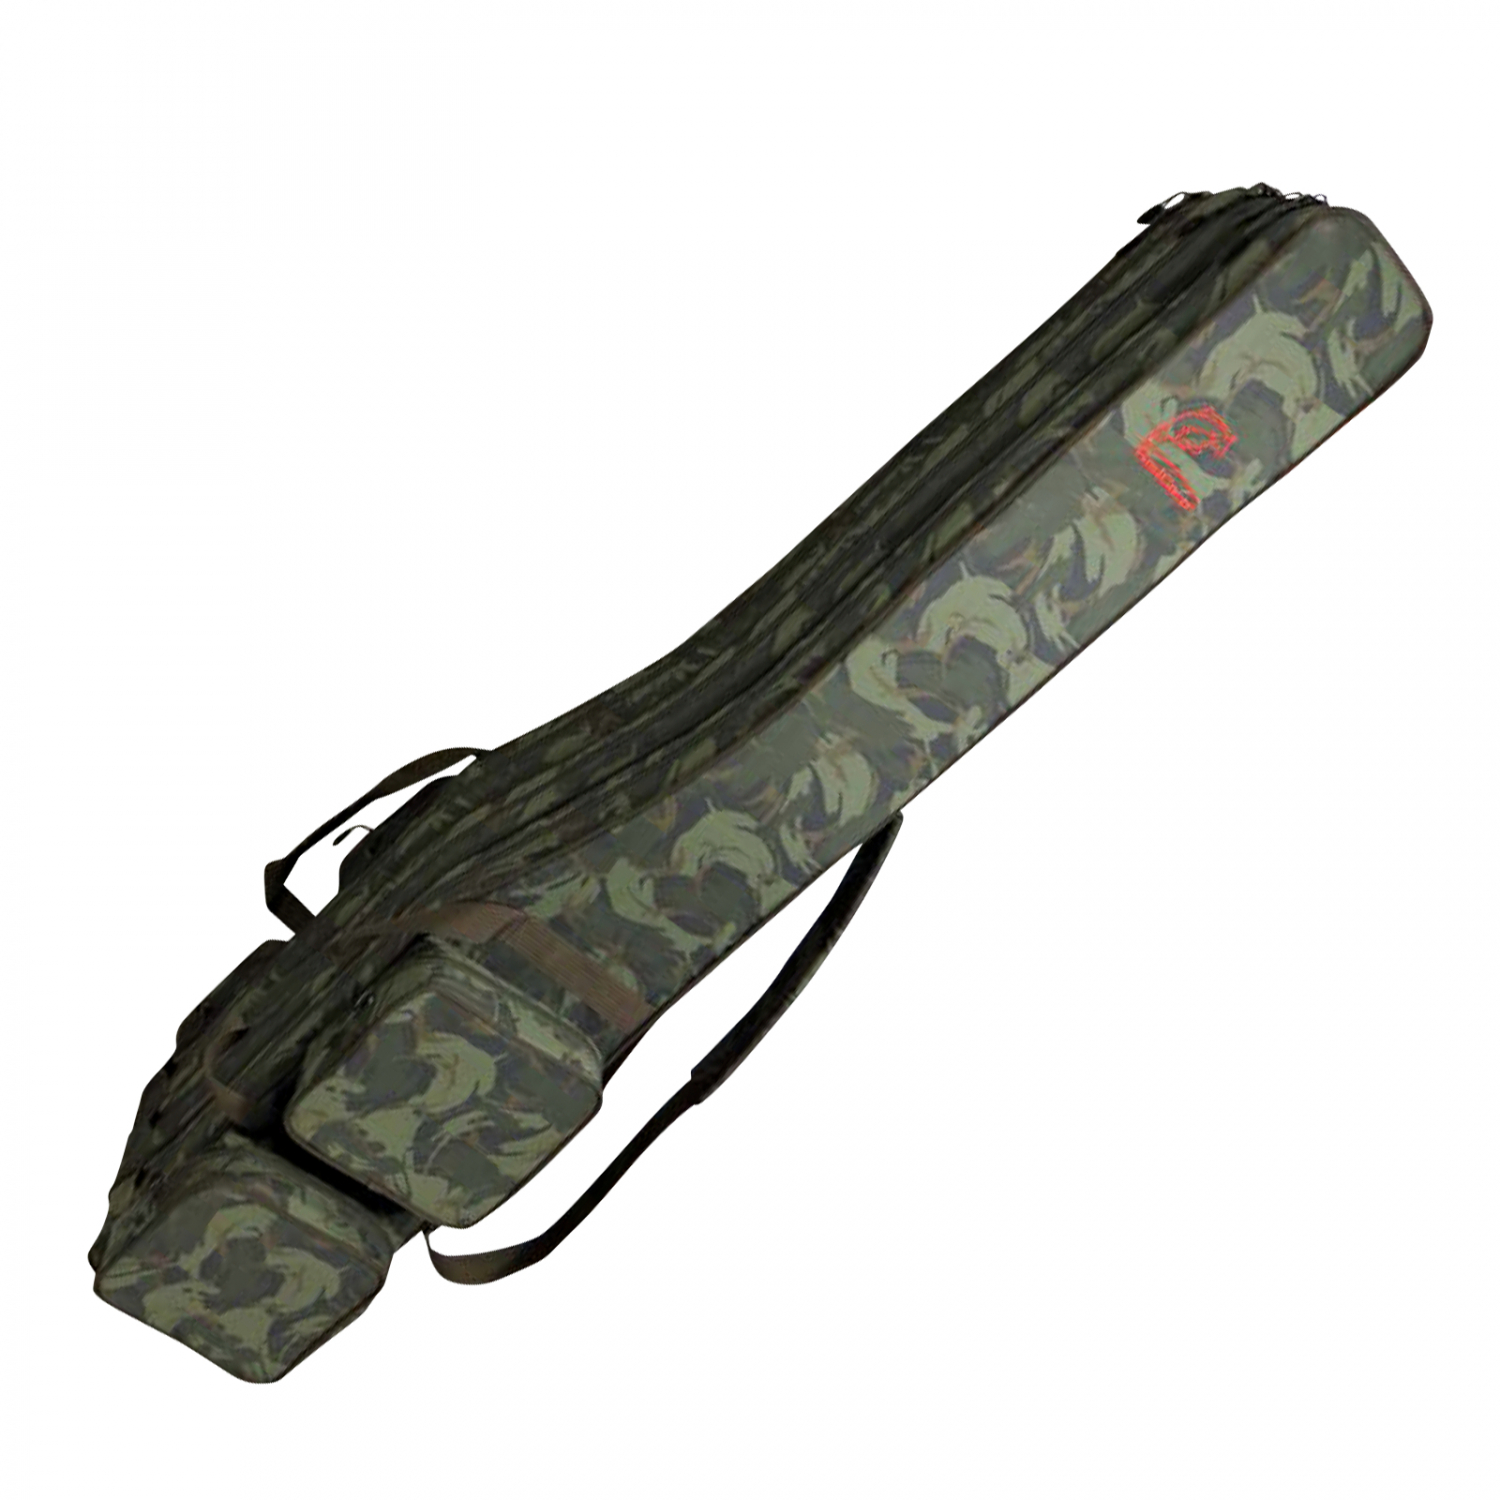 Behr All-round rod bag Red Carp at low prices